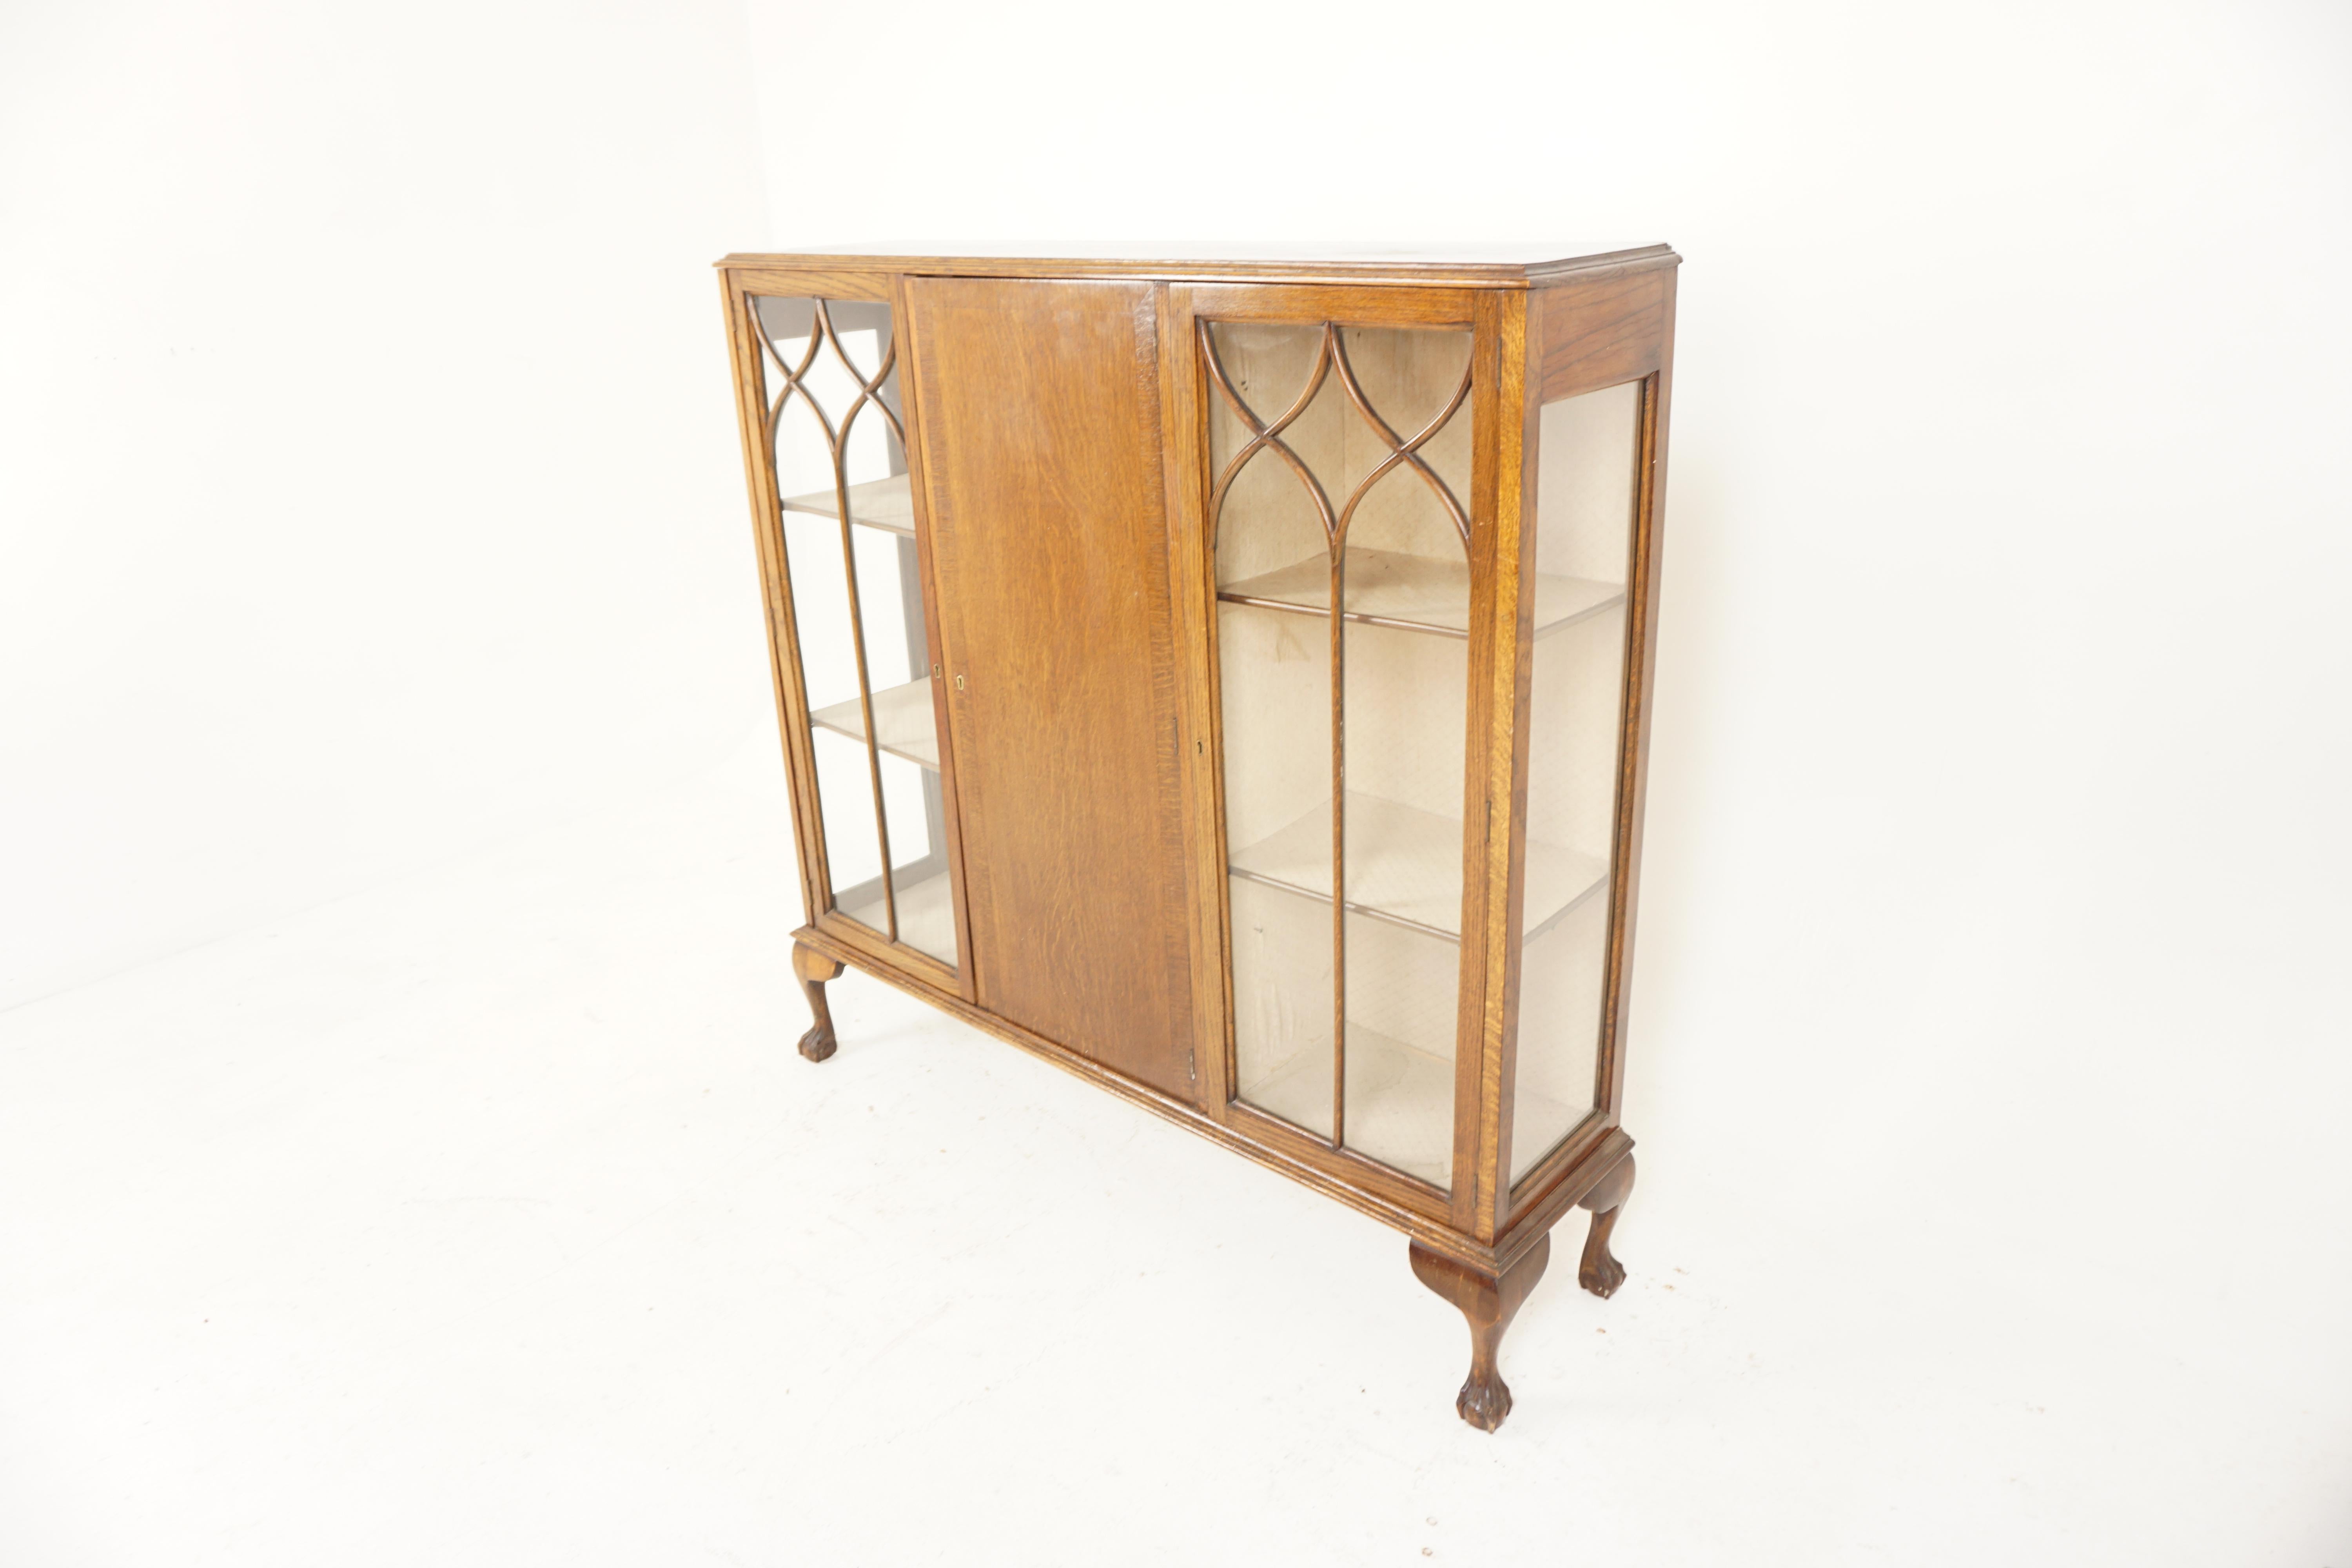 Vintage oak 3 door display cabinet, china cabinet, bookcase, Scotland 1920, H896

Scotland 1920
Solid Oak
Original Finish
Rectangular moulded top with a central oak door that opens to reveal a pair of adjustable shelves
Flank by pair of